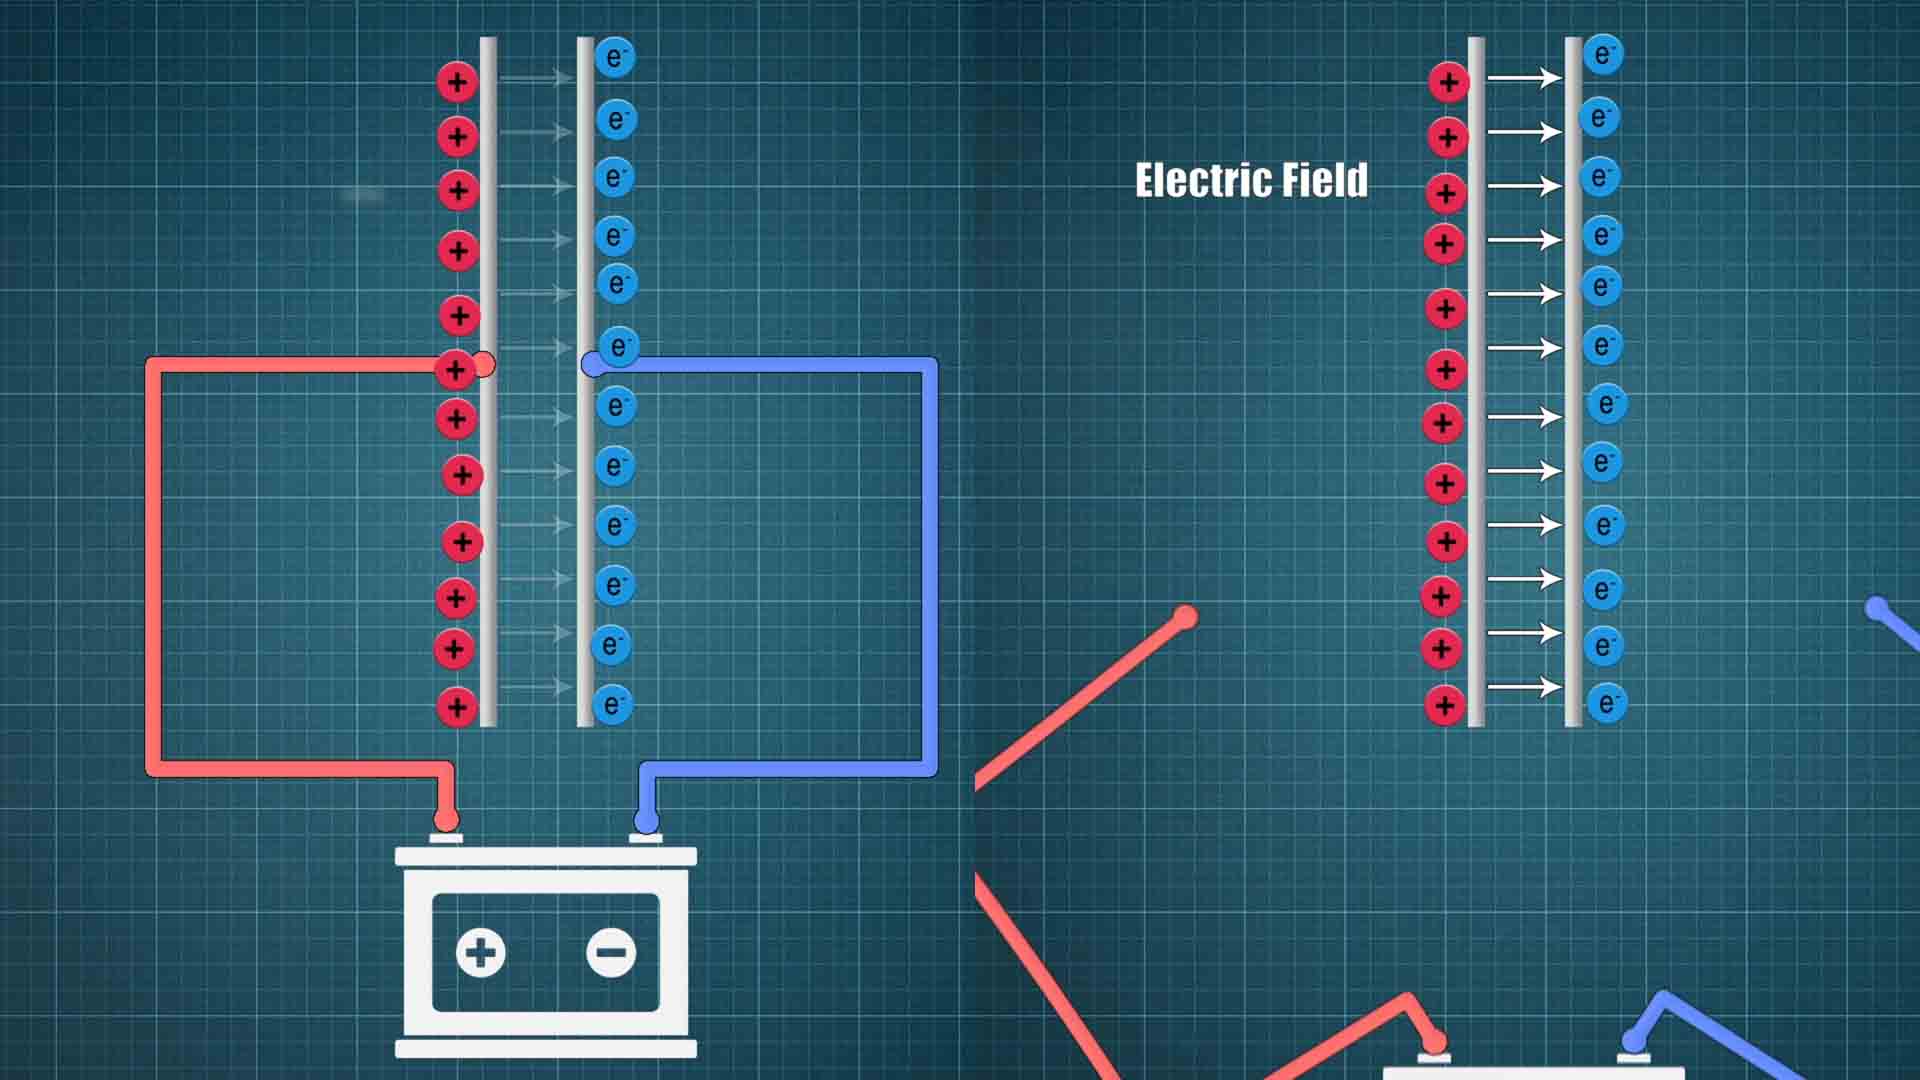 how capacitor works?